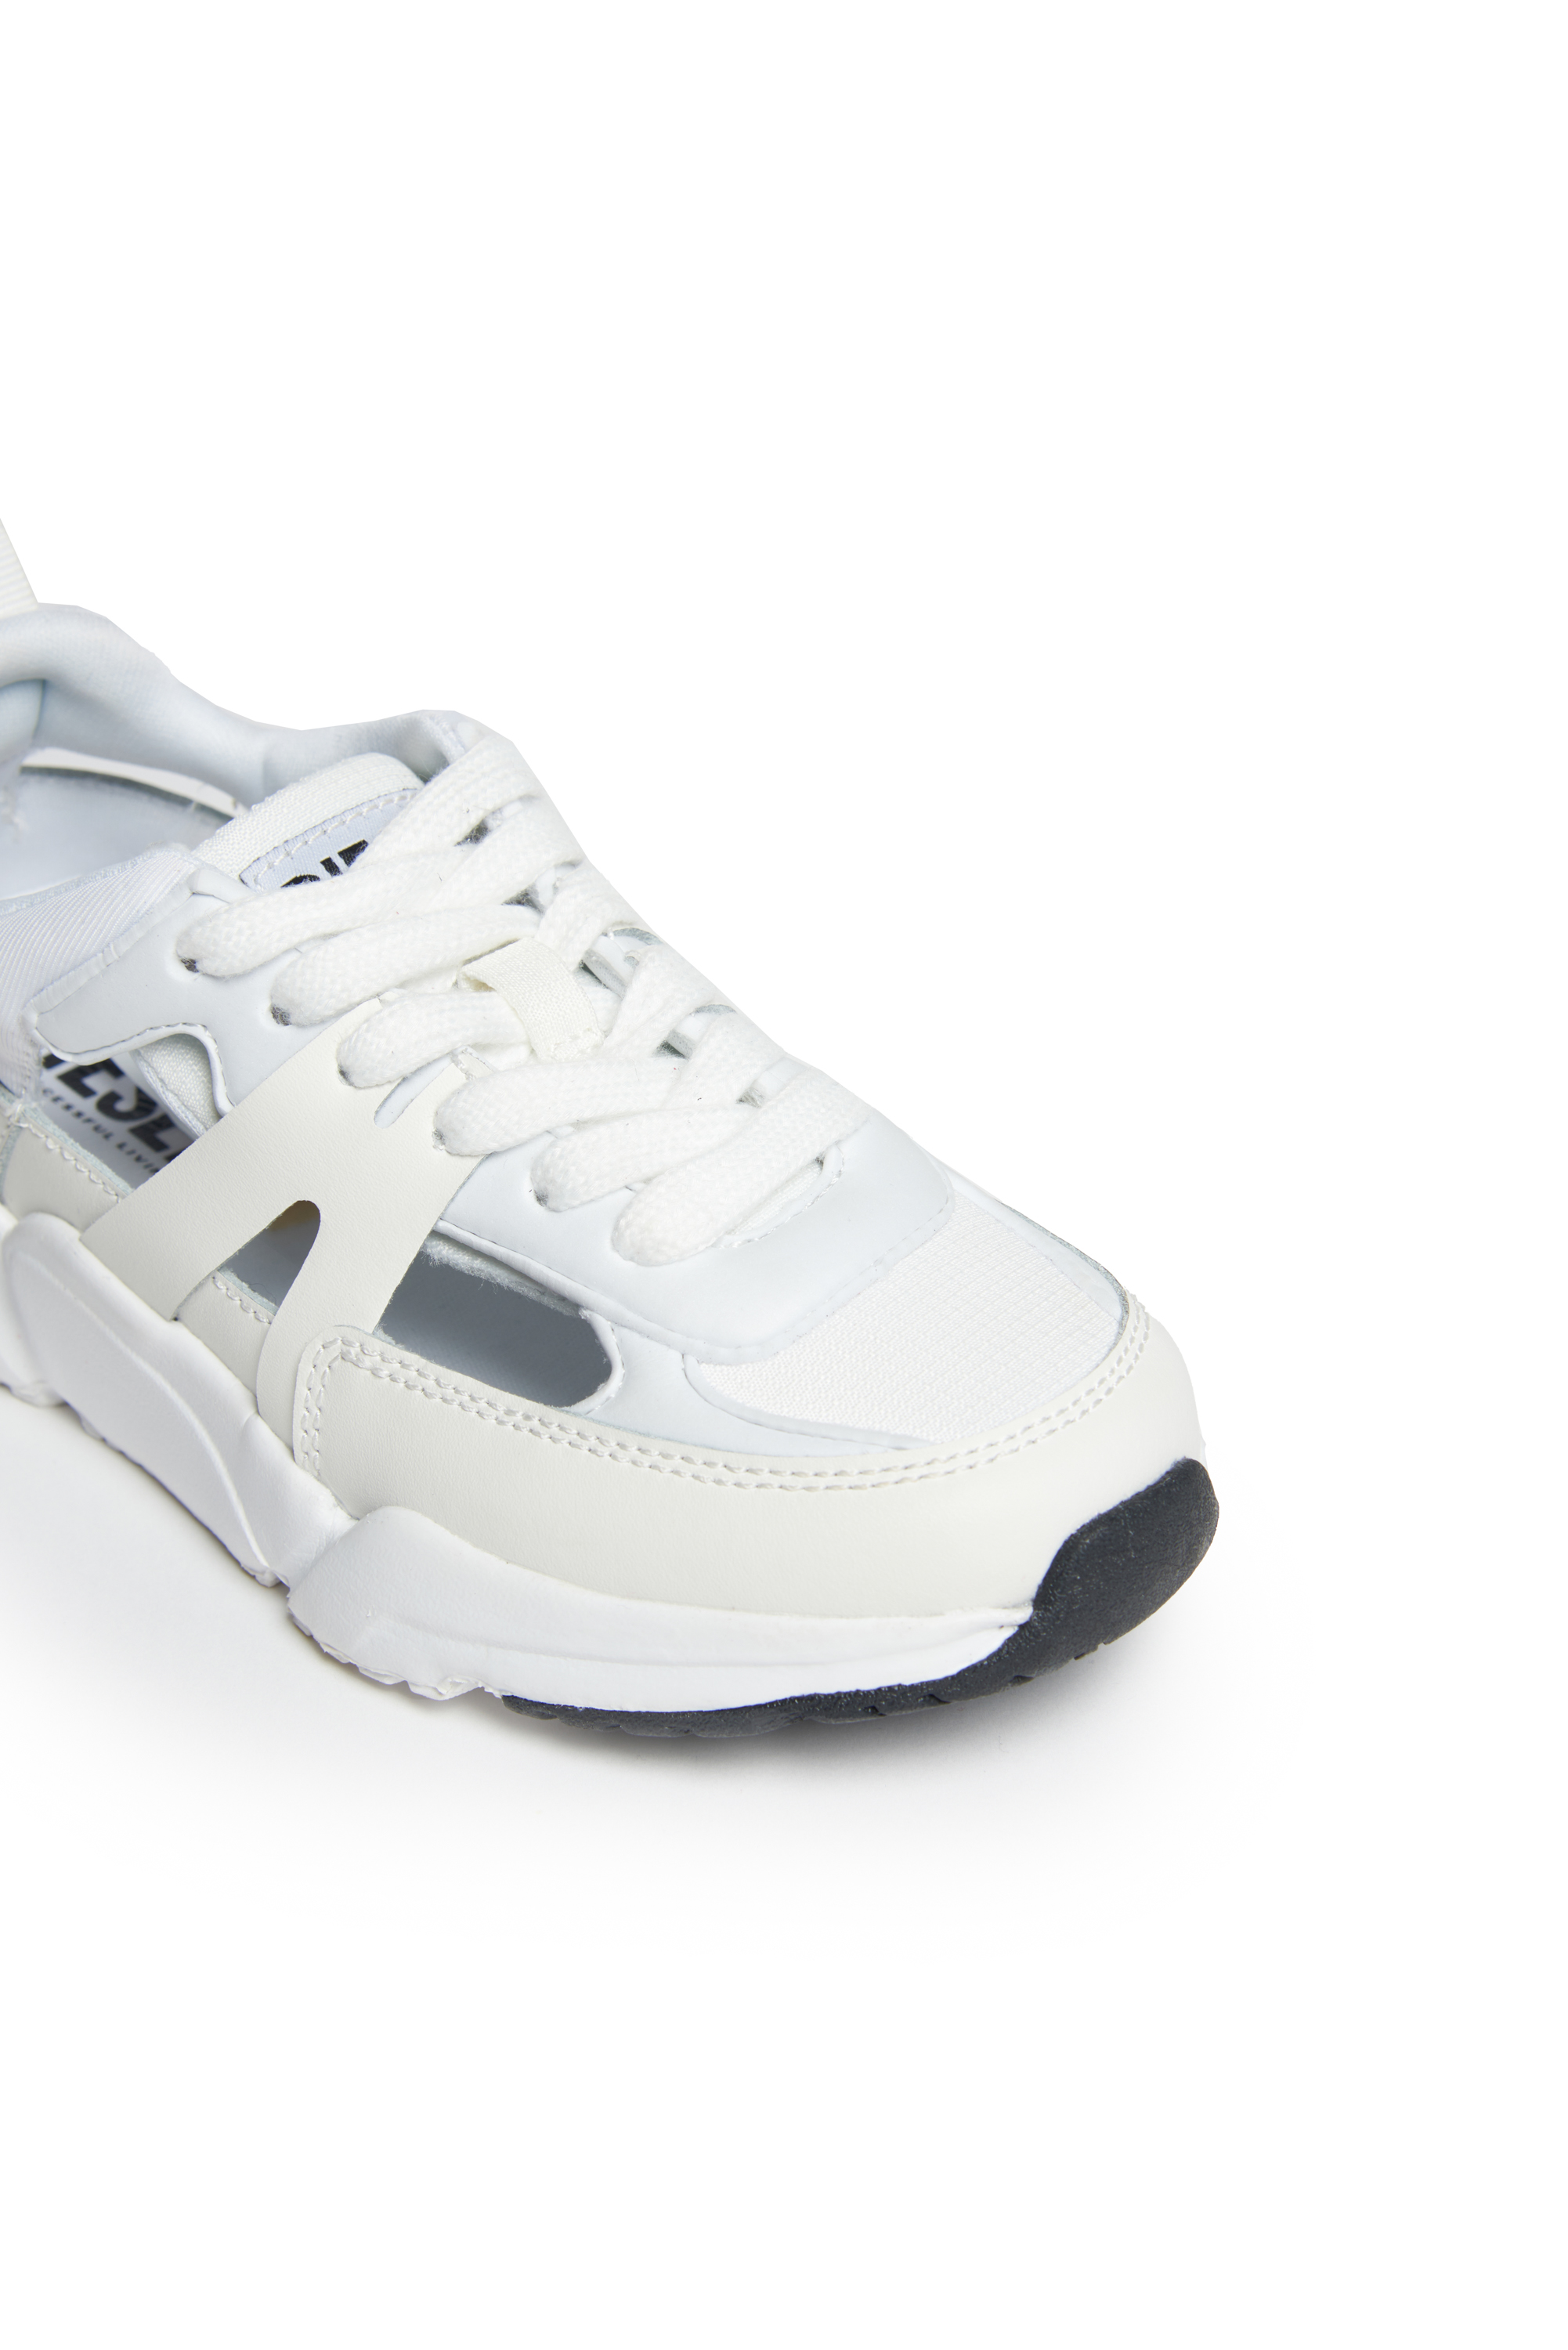 Diesel - S-MILLENIUM LCS PRO, Unisex Sandal sneaker in ripstop and leather in White - Image 4